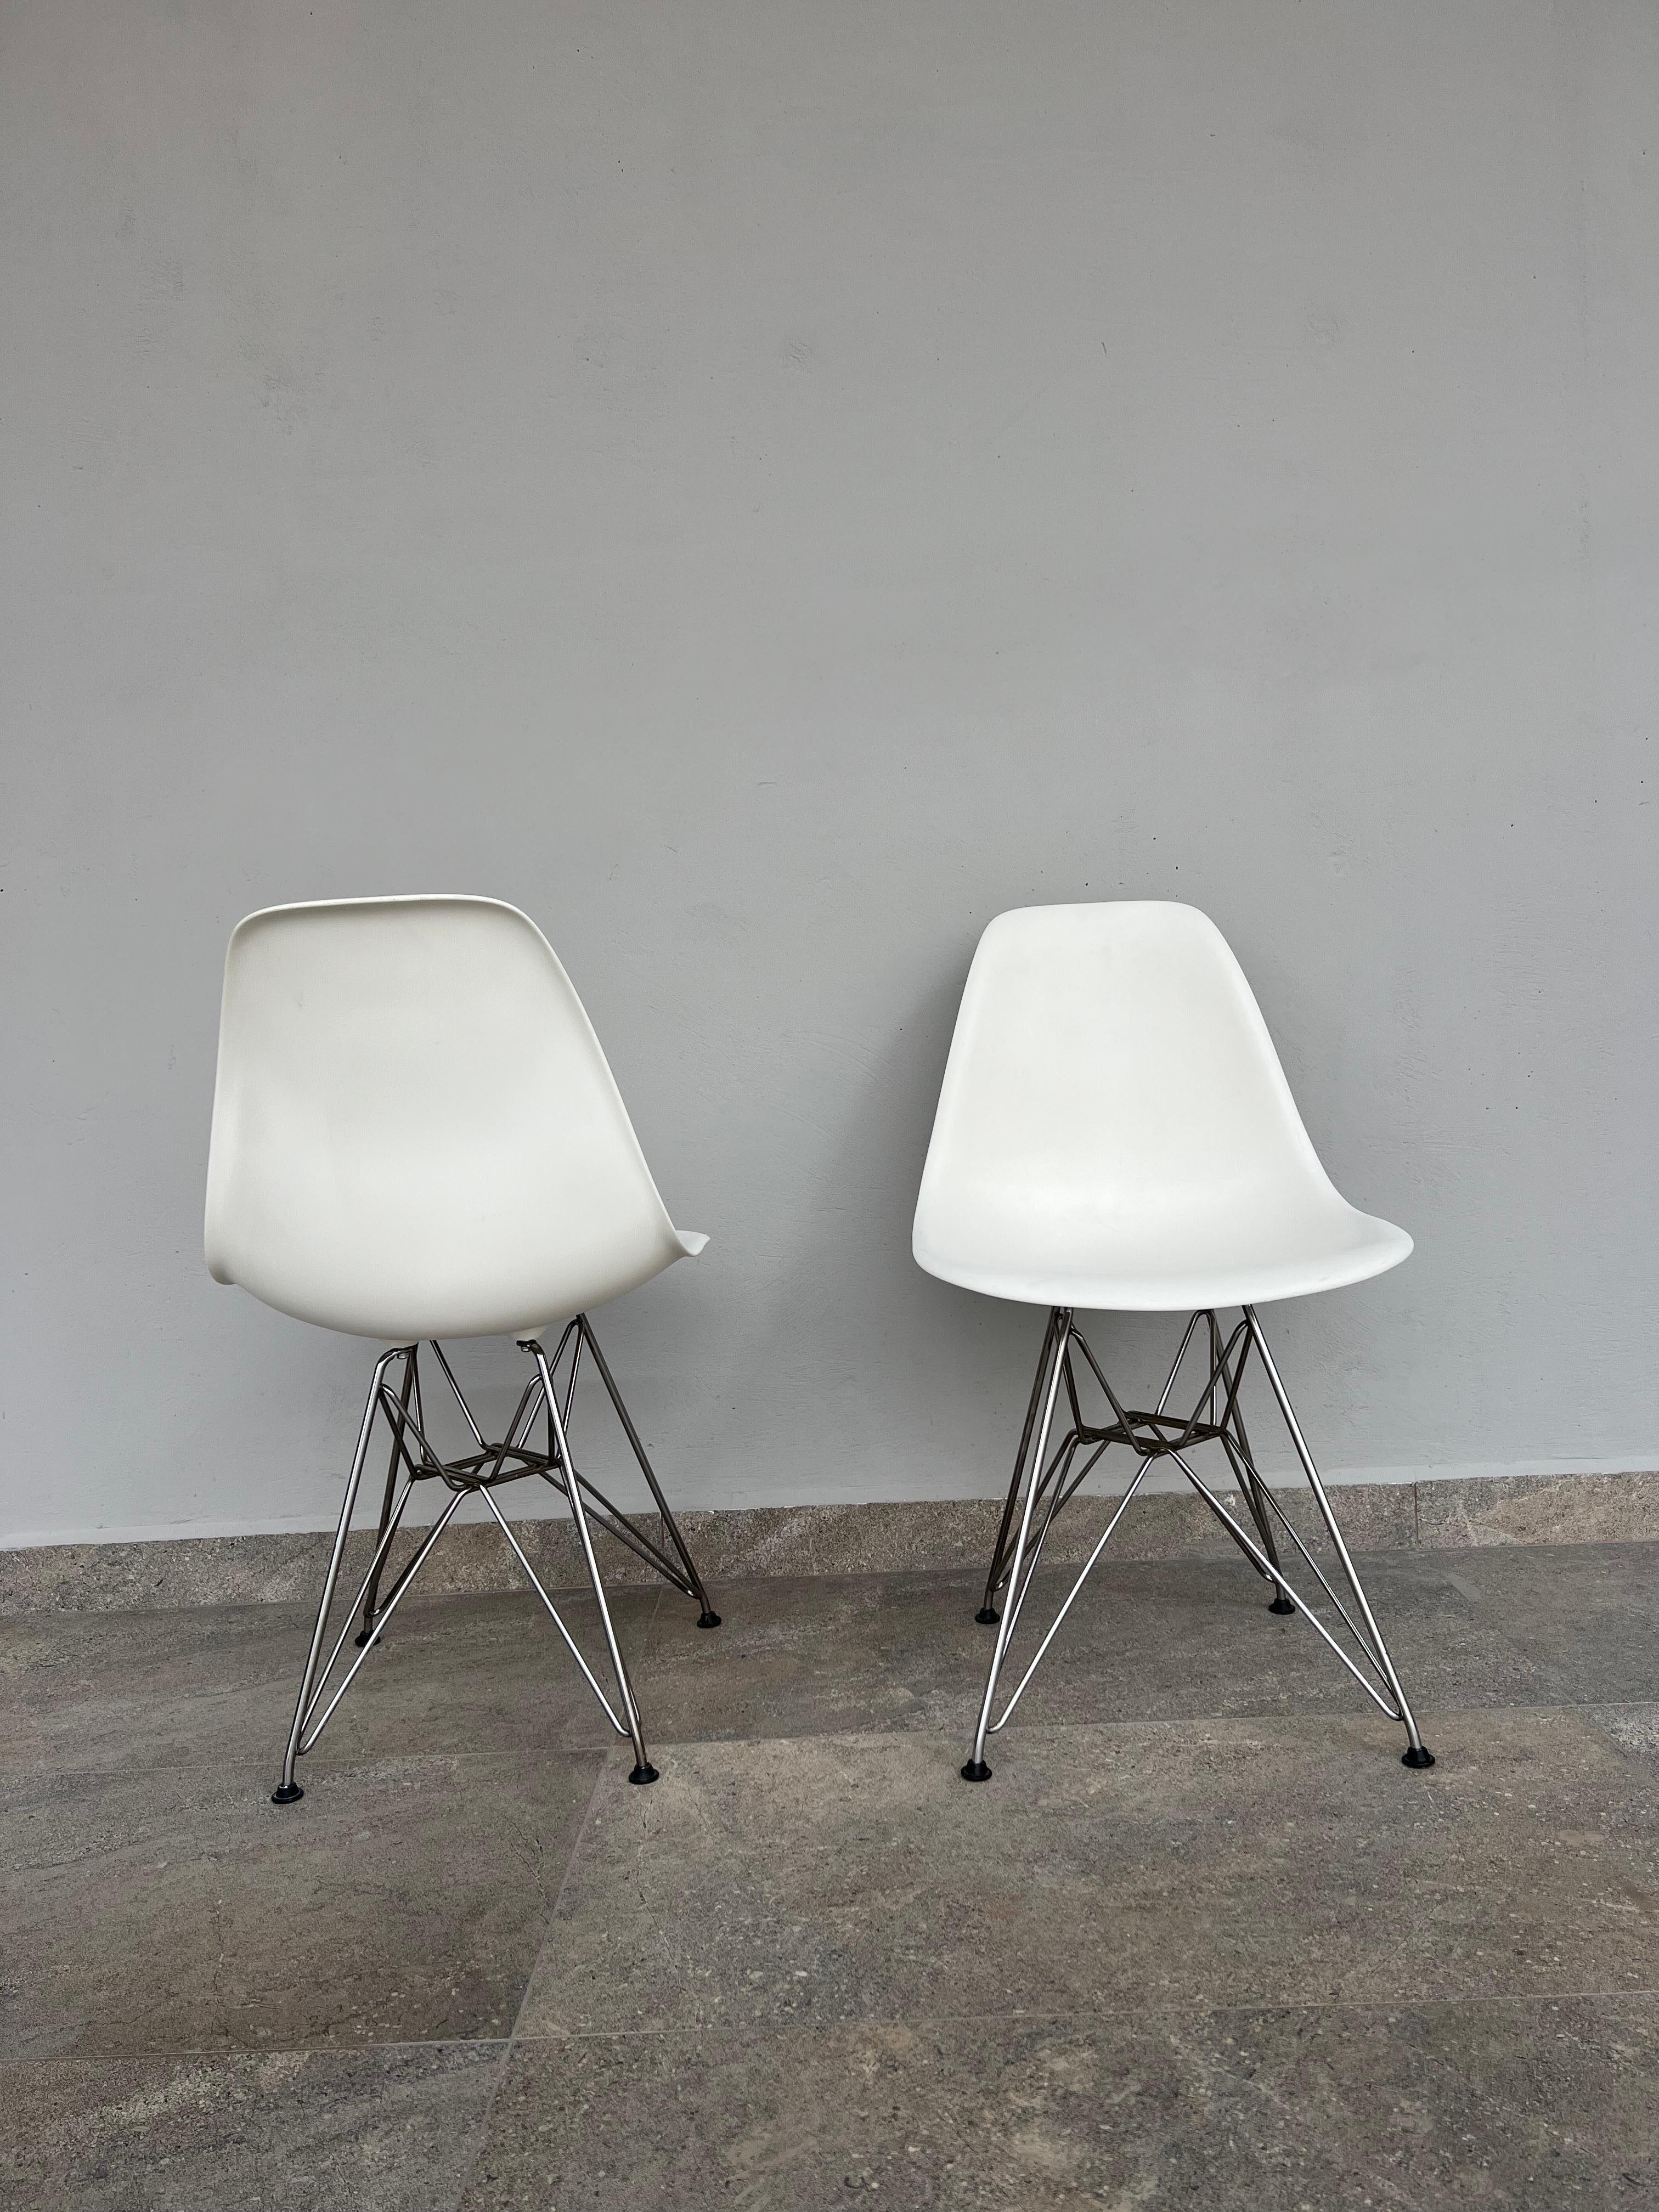 American Pair of Eames Molded White Plastic Chairs with Eiffel Tower Bases For Sale